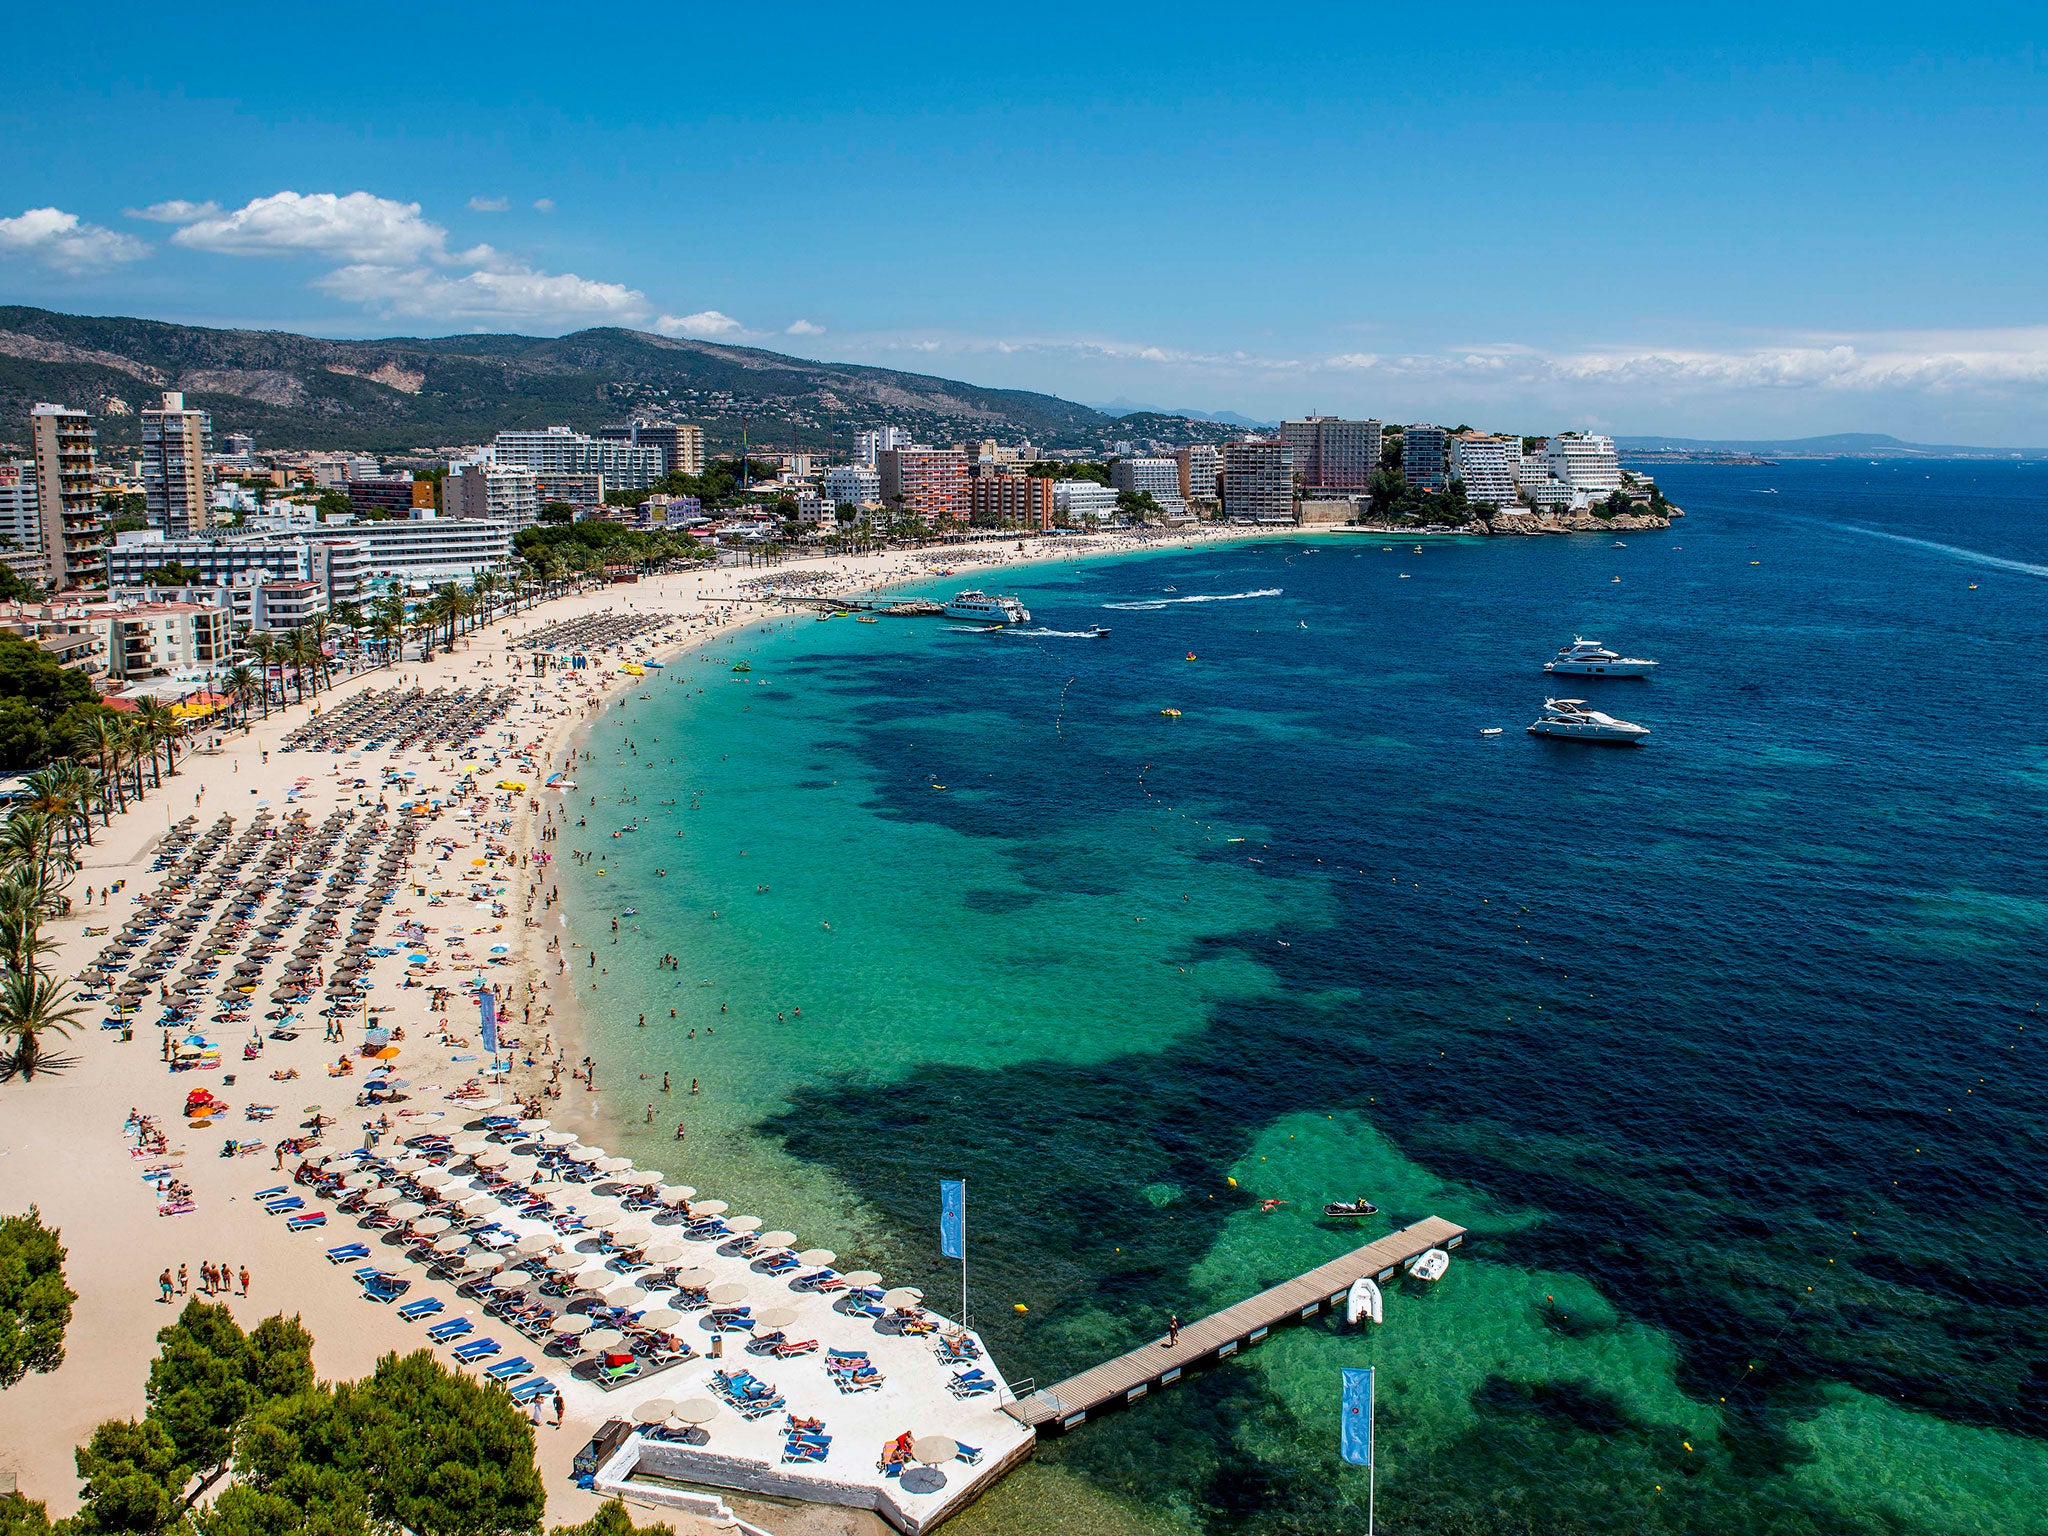 File image: The island of Mallorca is popular with British expats